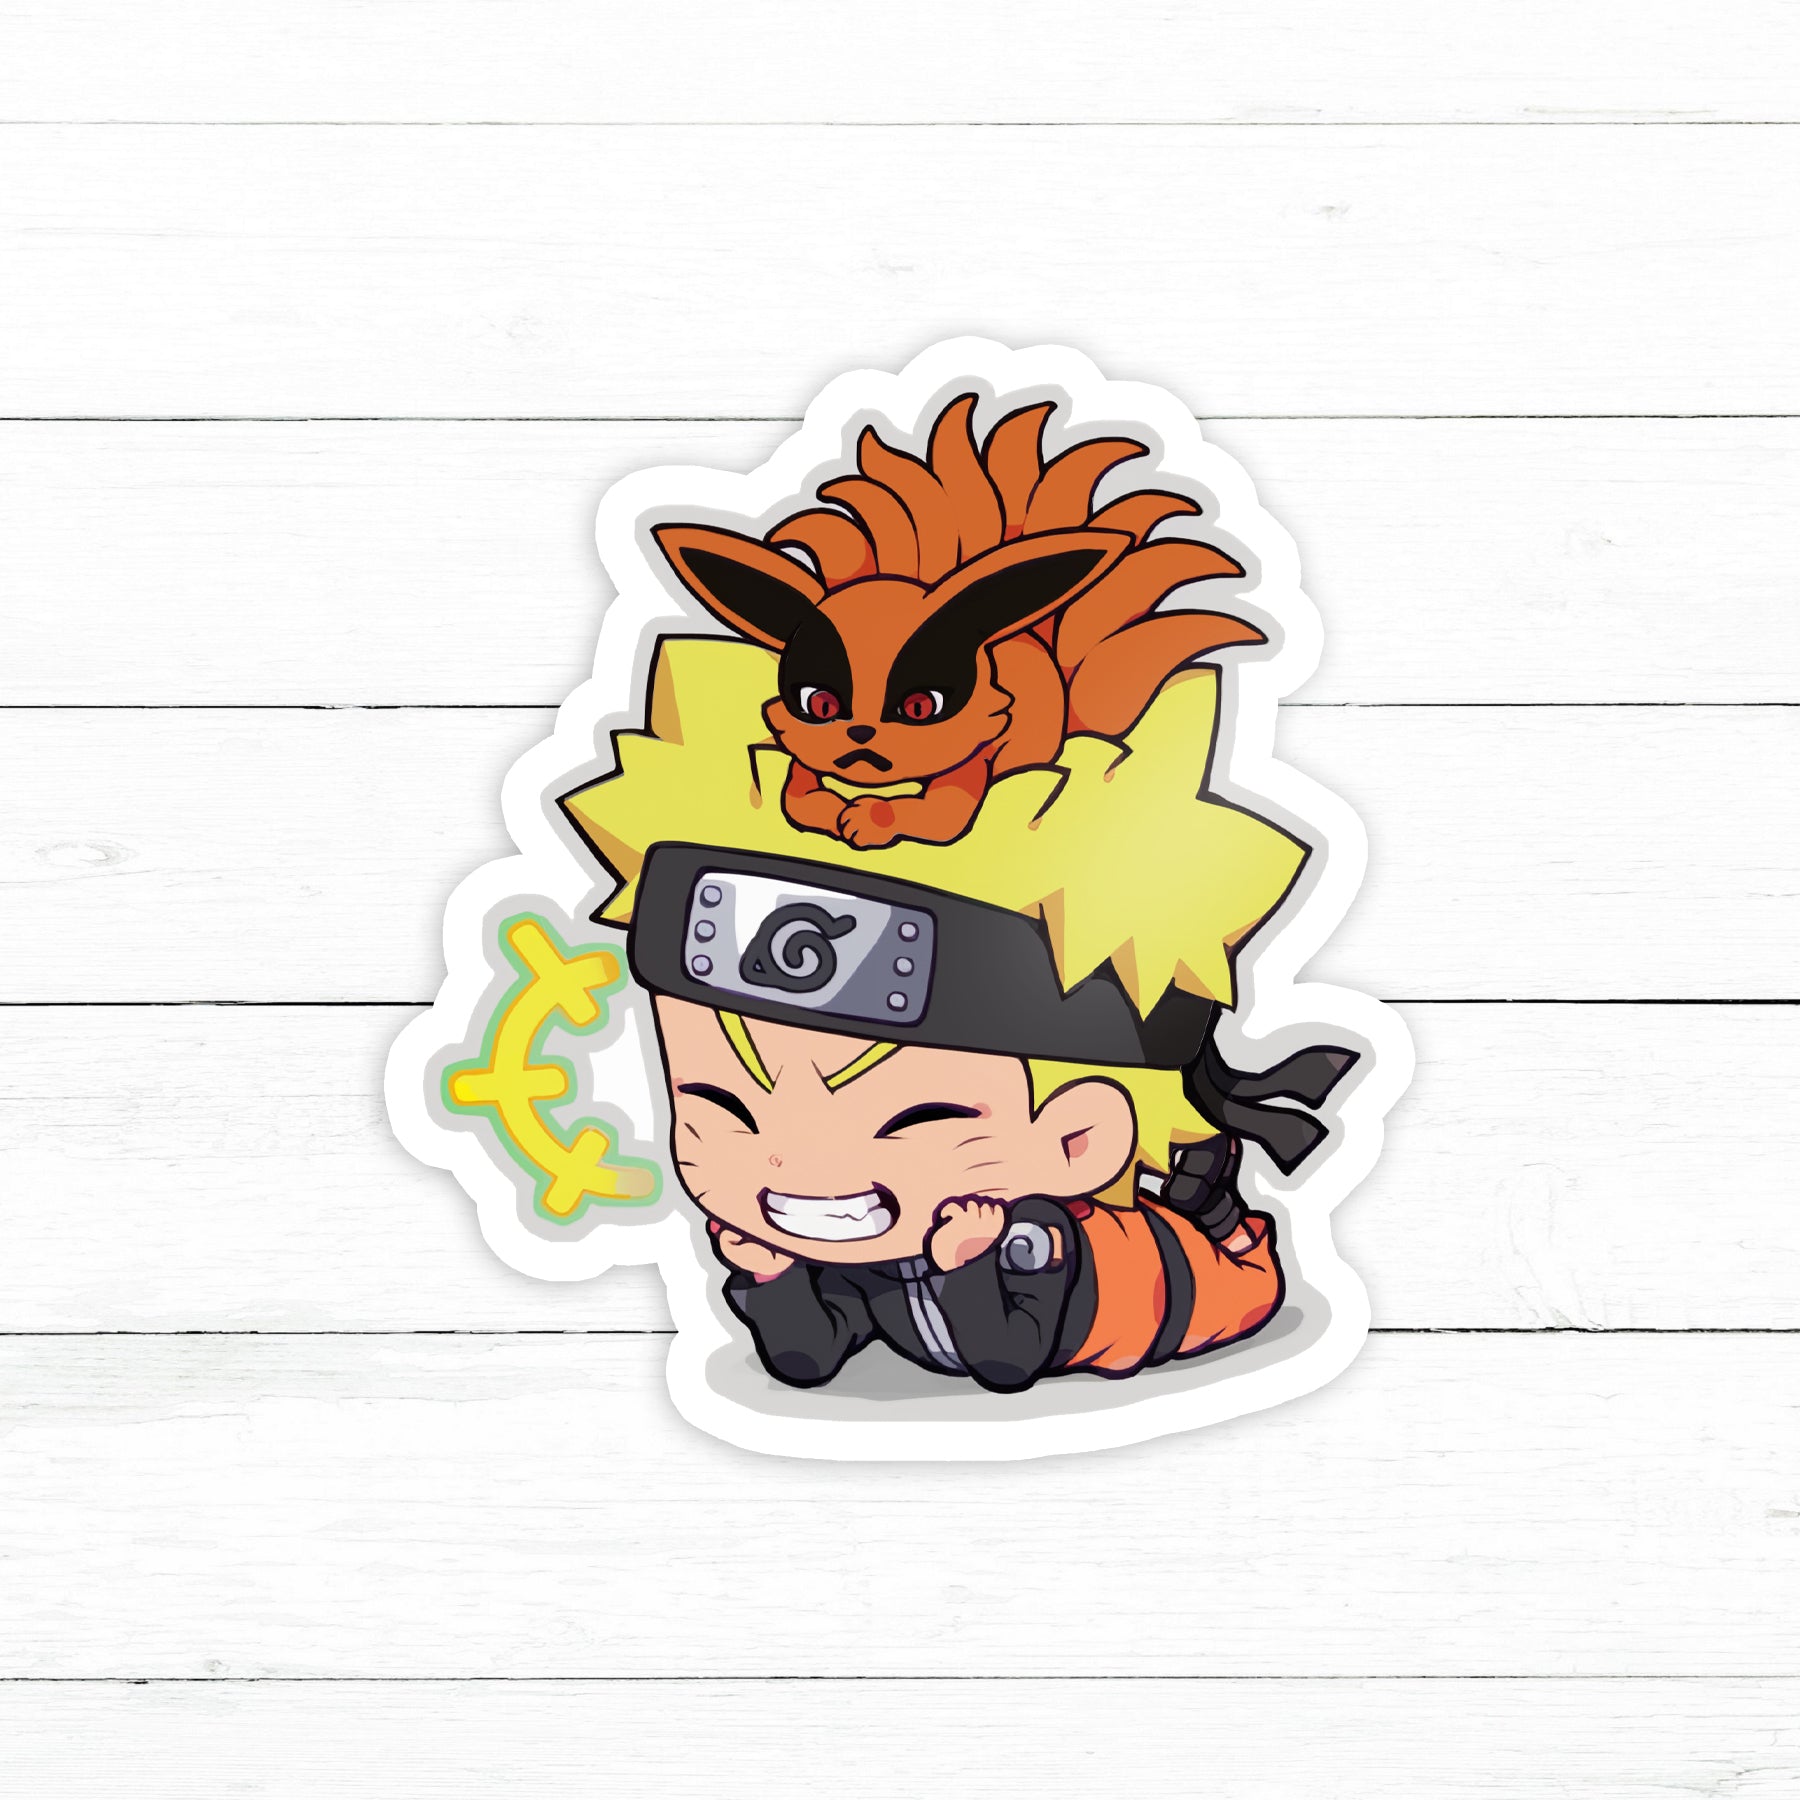 Naruto Stickers for Sale  Anime stickers, Cute stickers, Aesthetic stickers